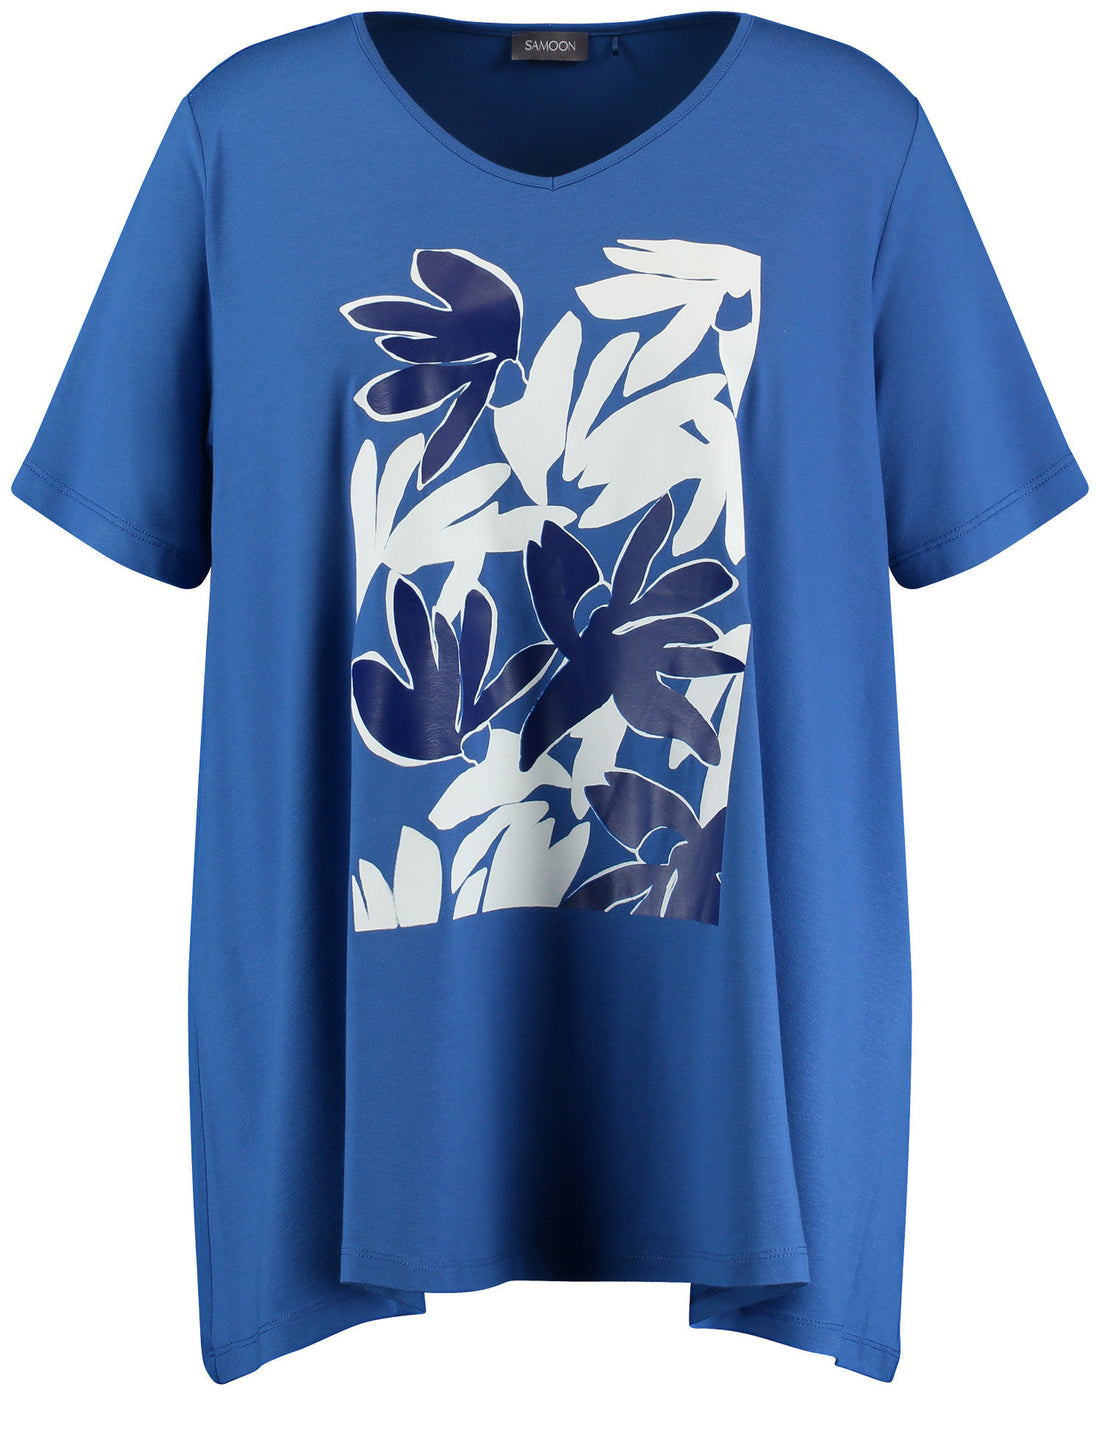 T-Shirt With A Floral Print_471046-26206_8862_01